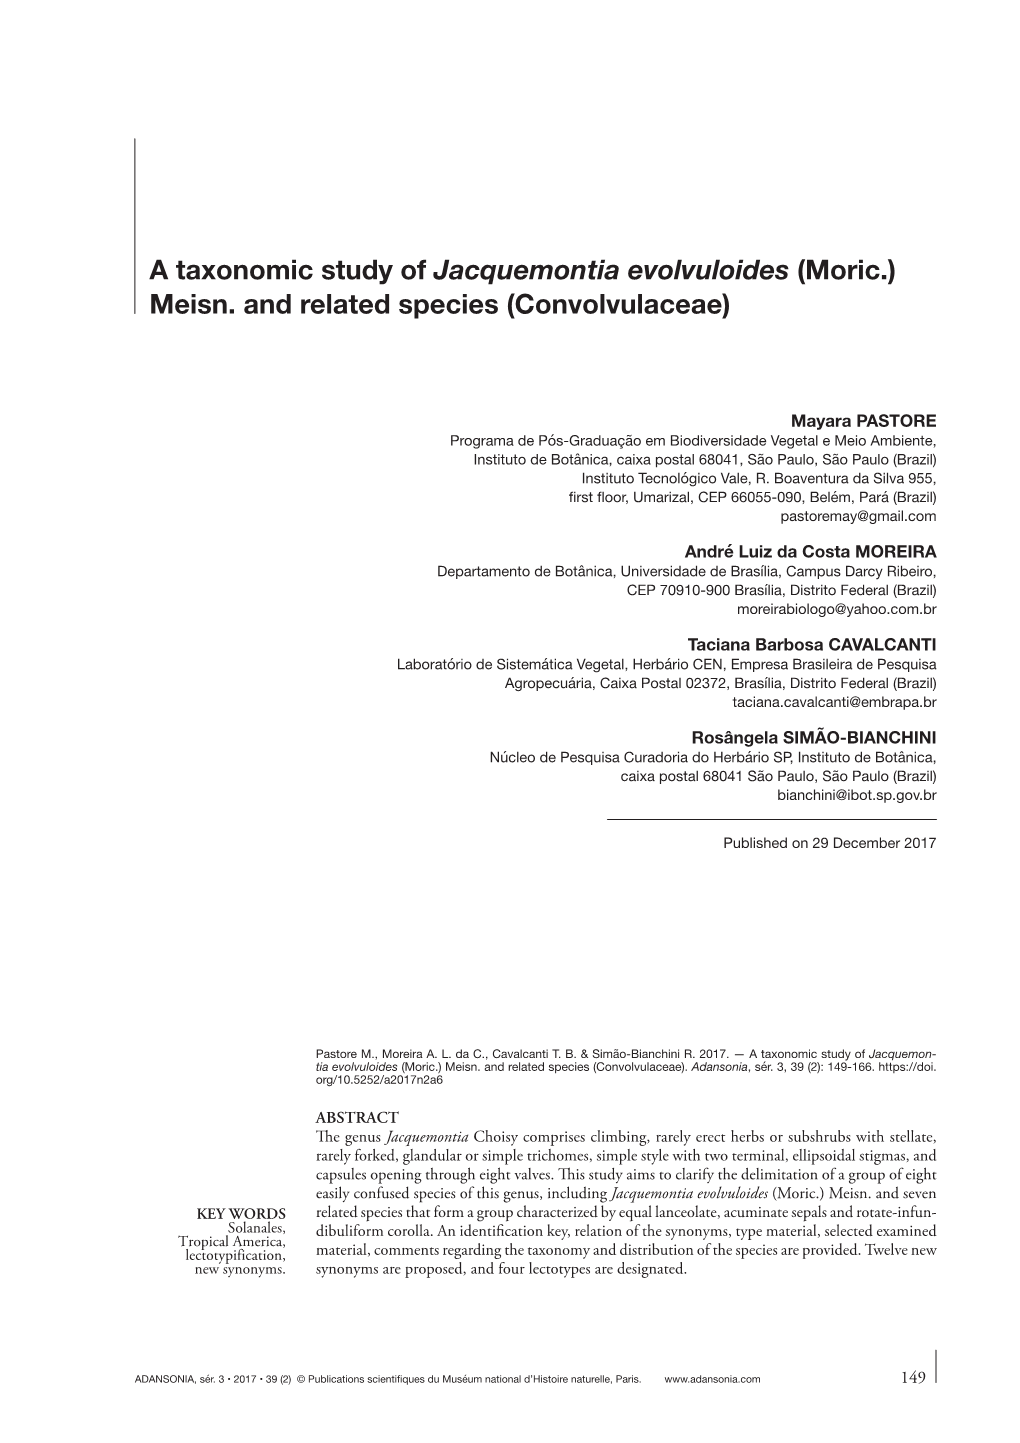 A Taxonomic Study of Jacquemontia Evolvuloides (Moric.) Meisn. and Related Species (Convolvulaceae)